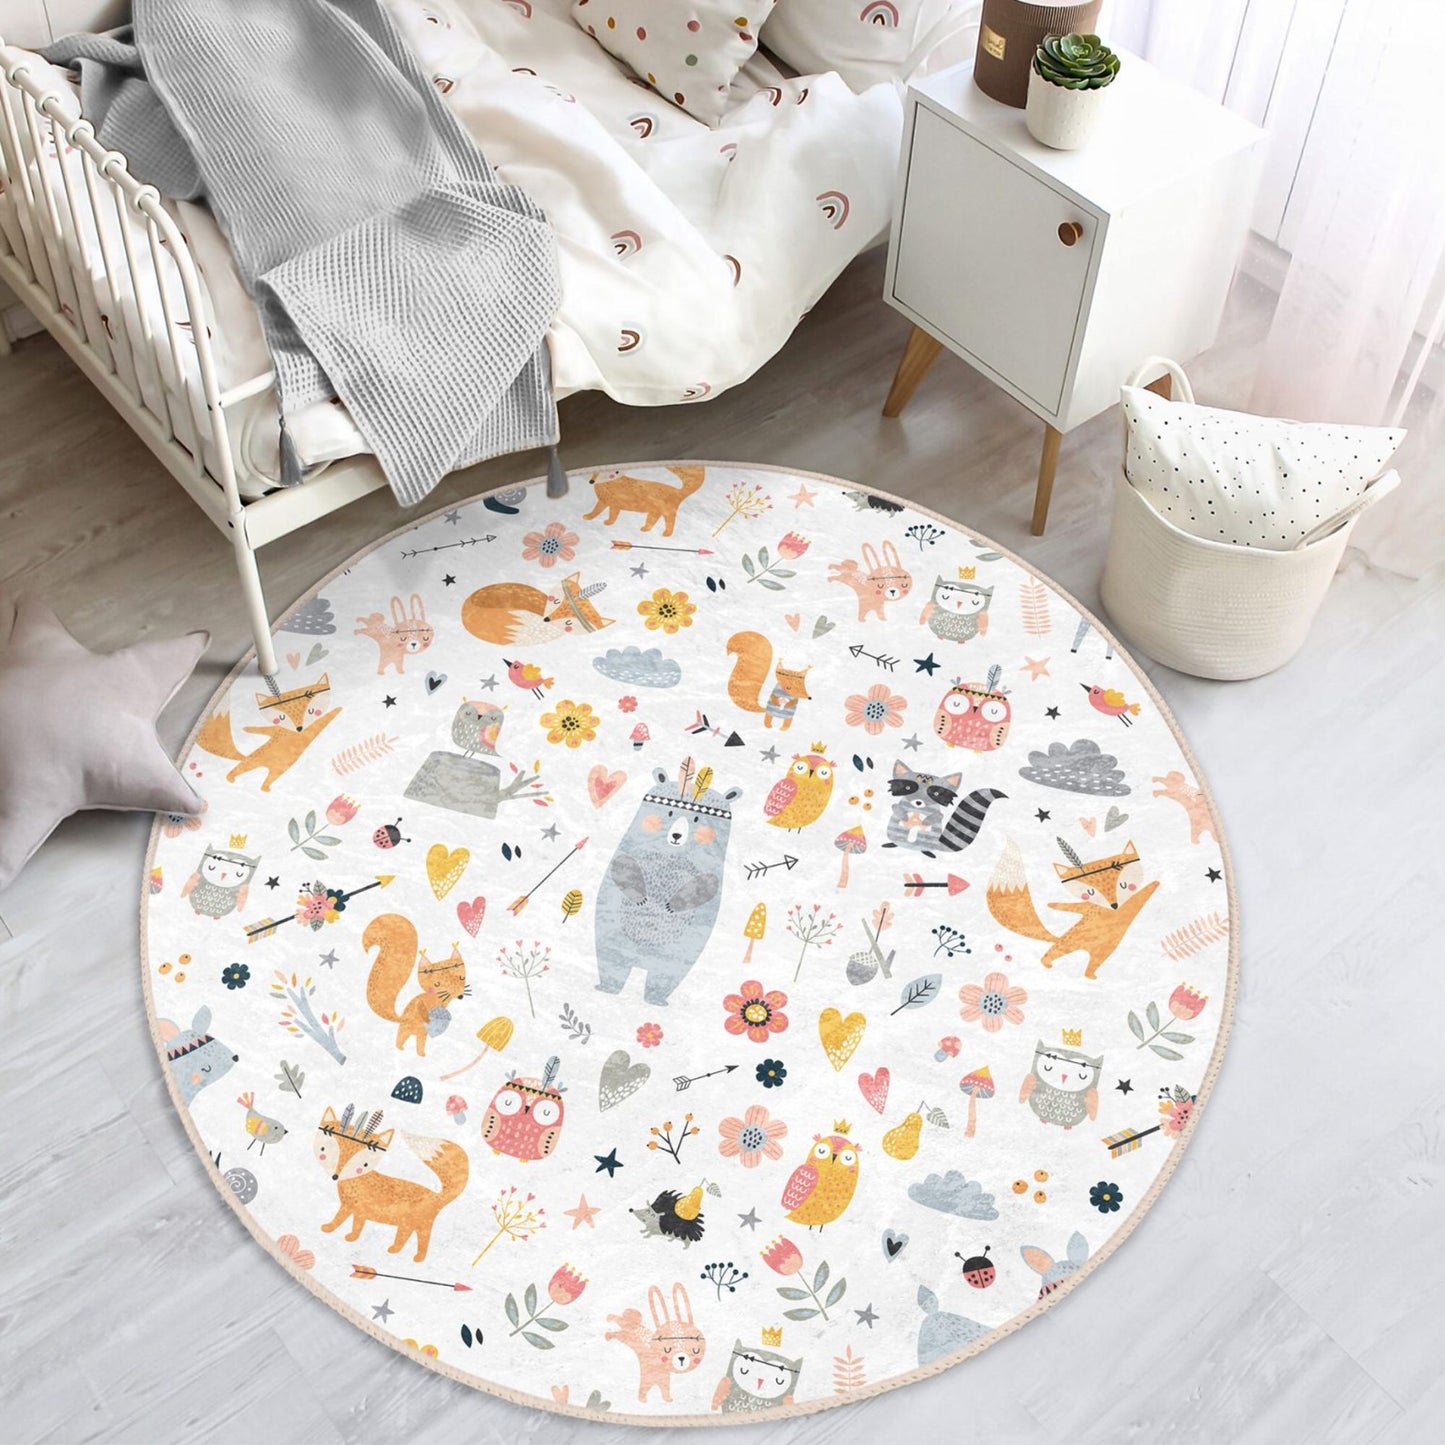 Soft & Colorful Homeezone Rug - Perfect for Kids' Rooms